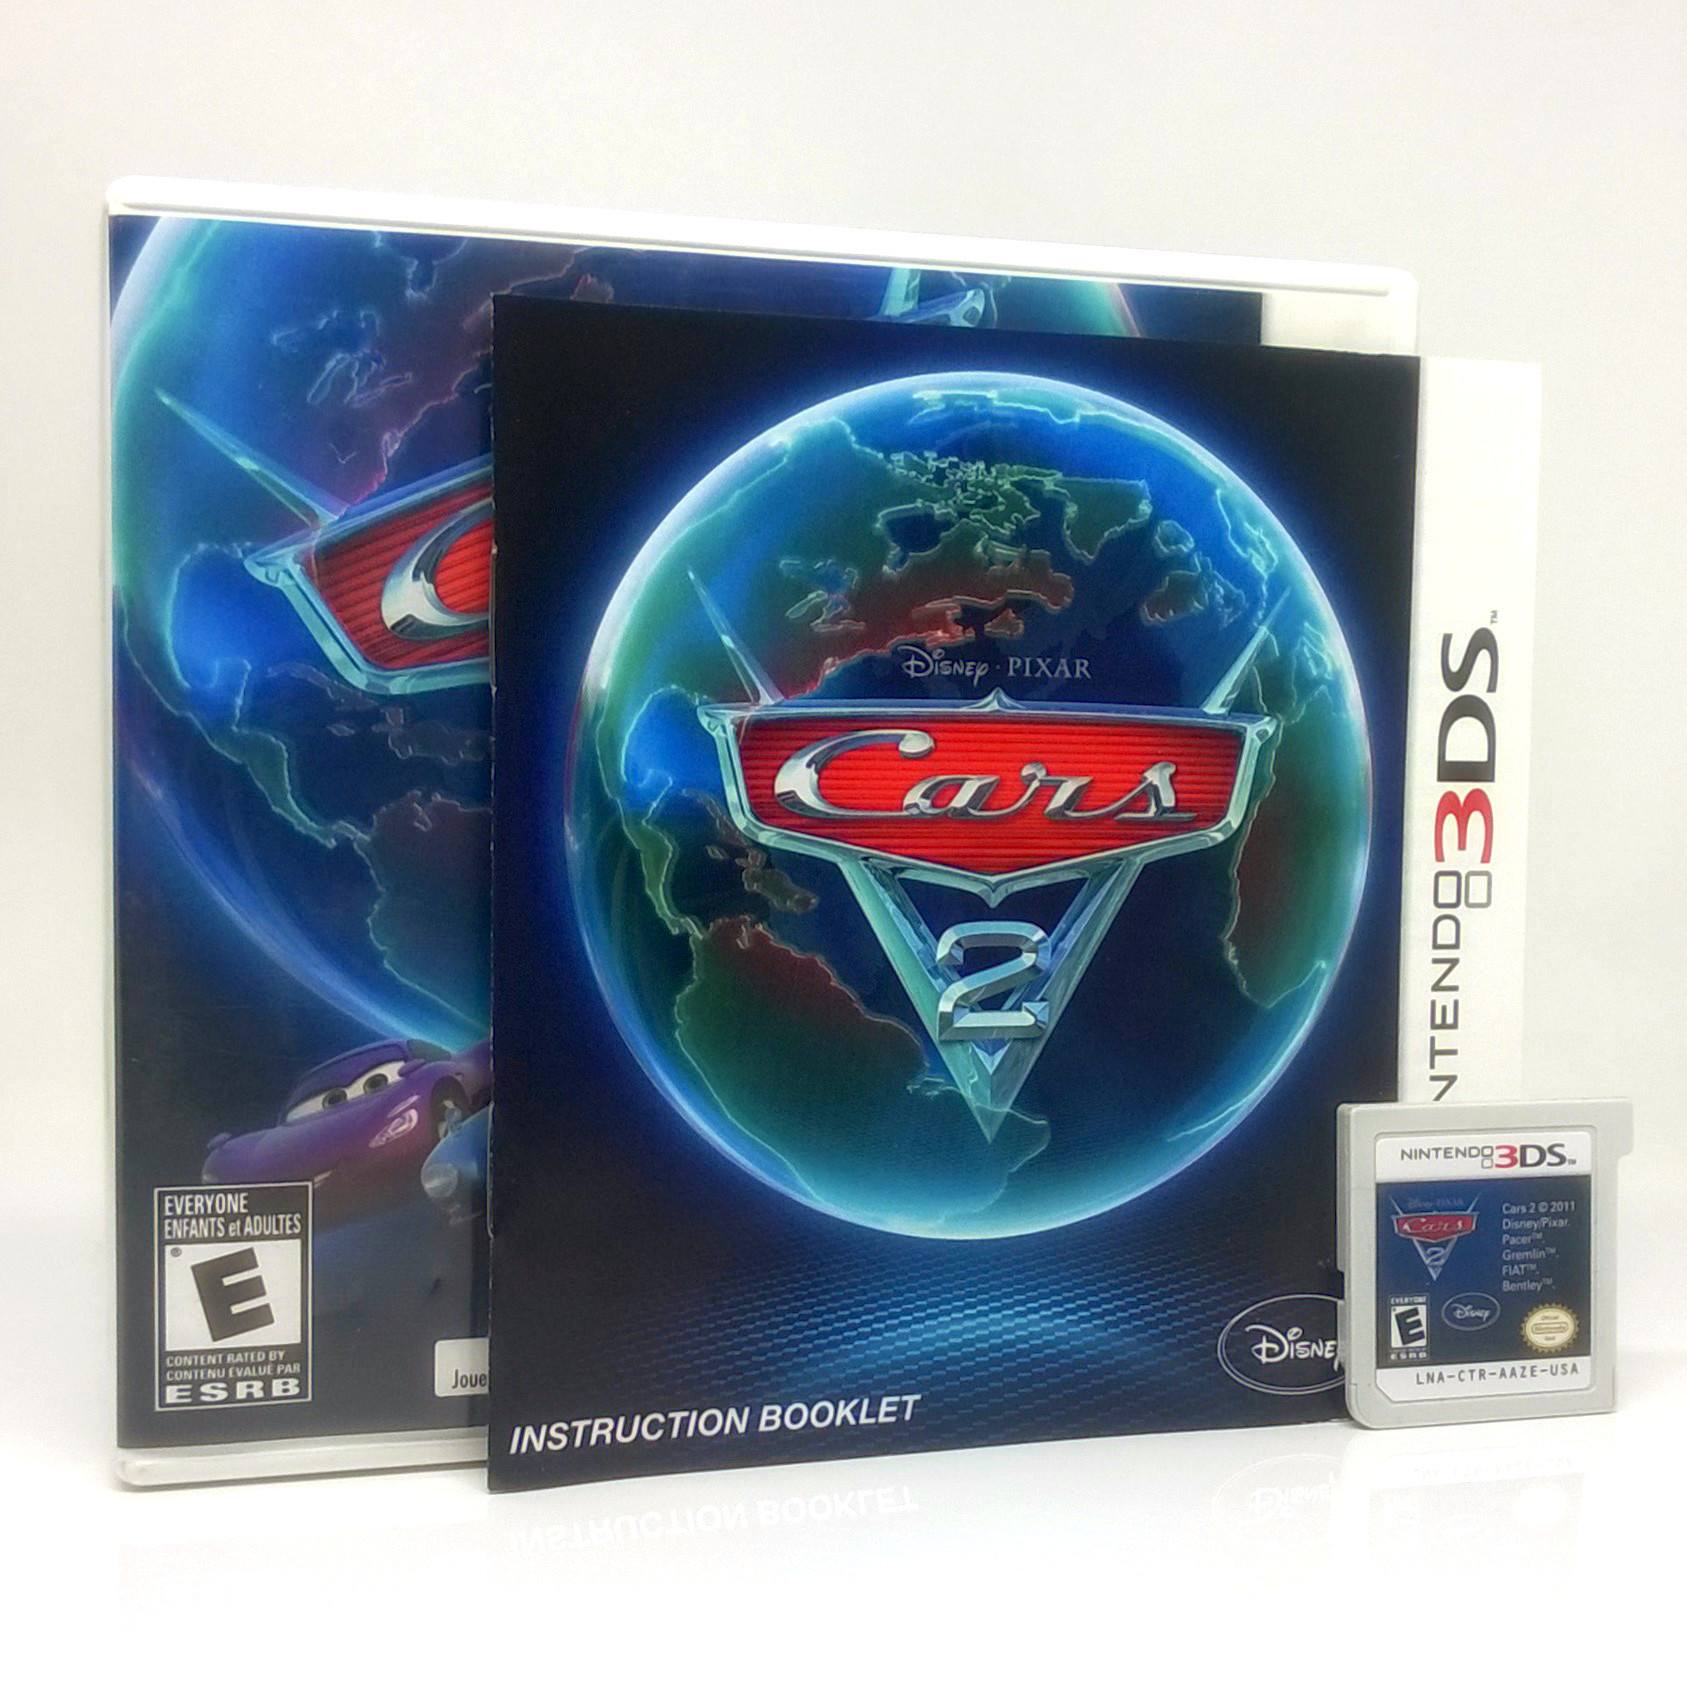 Cars 2 Nintendo 3DS Game